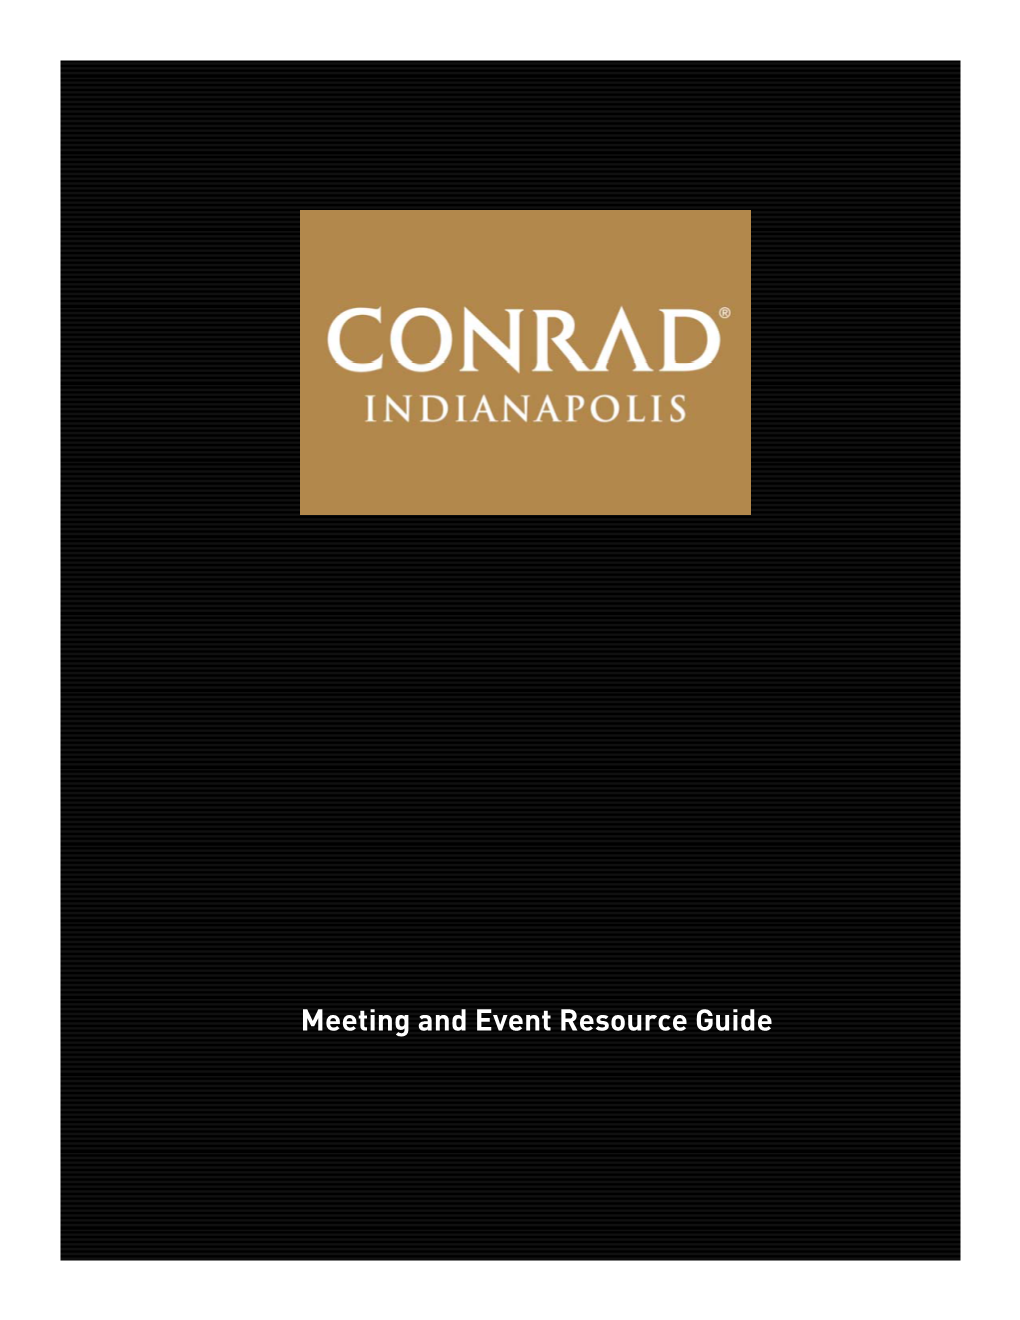 Conrad Indianapolis Meeting & Event Resource Guide